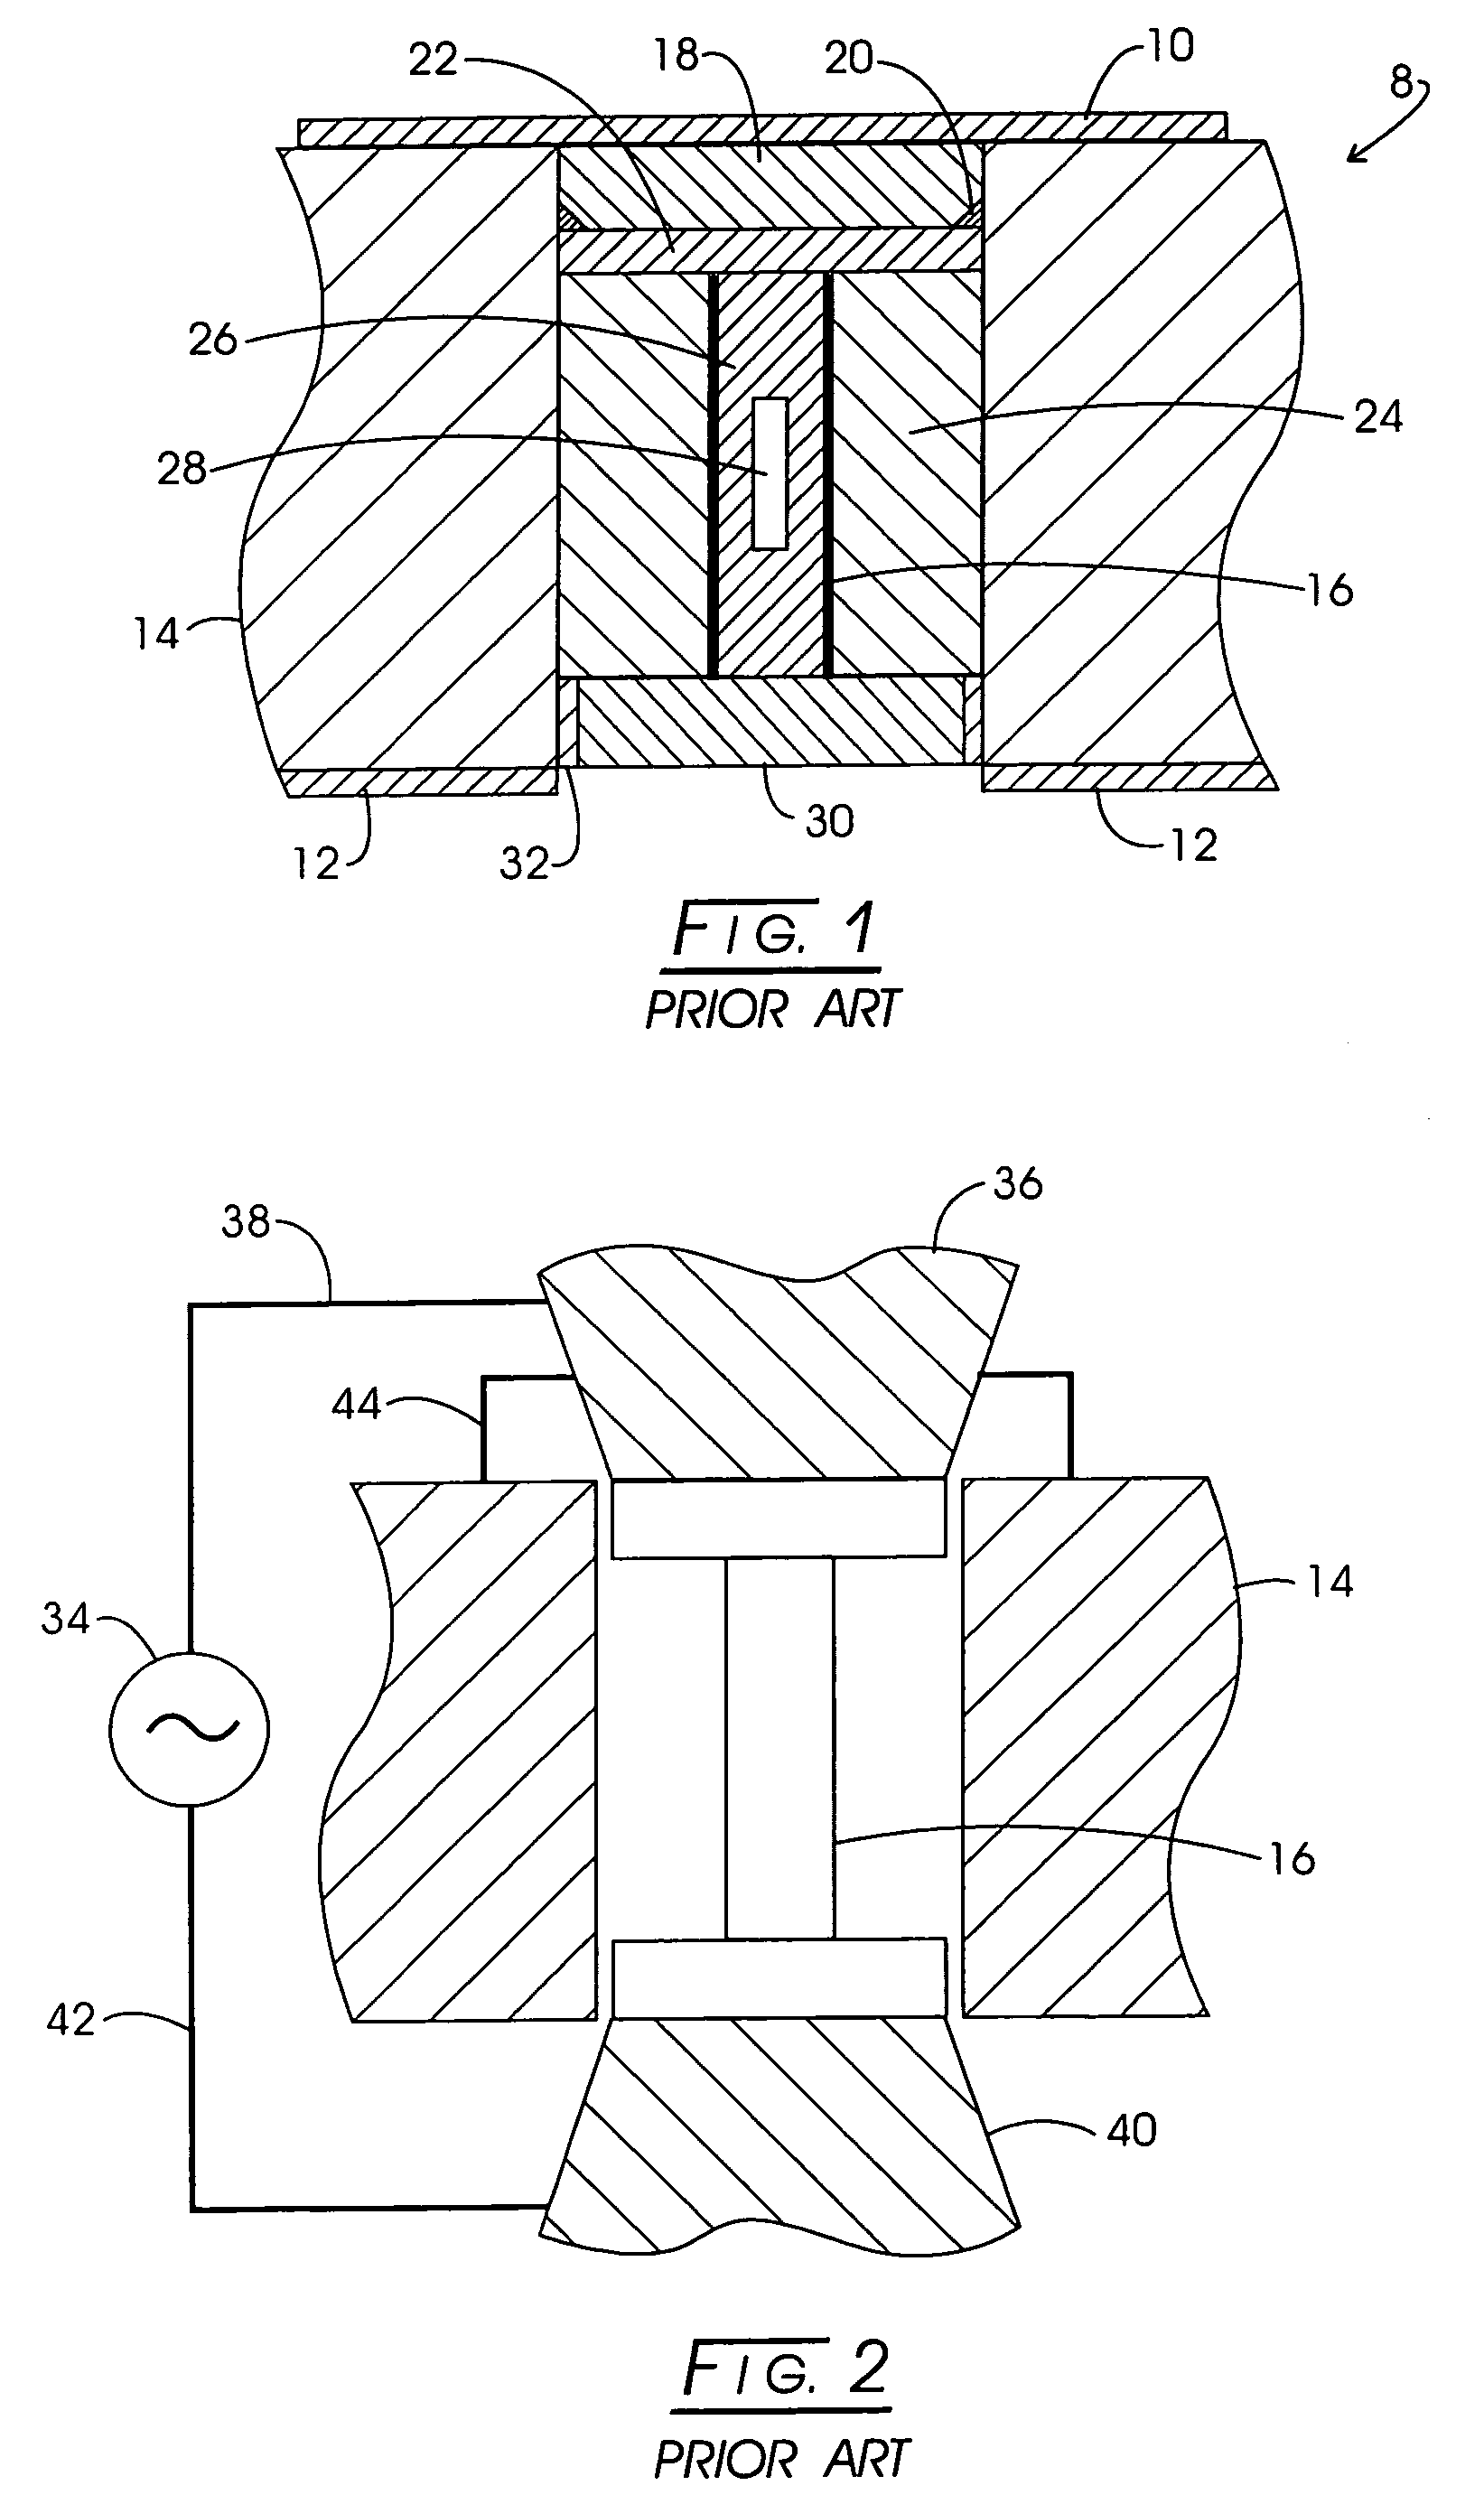 High pressure/high temperature apparatus with improved temperature control for crystal growth